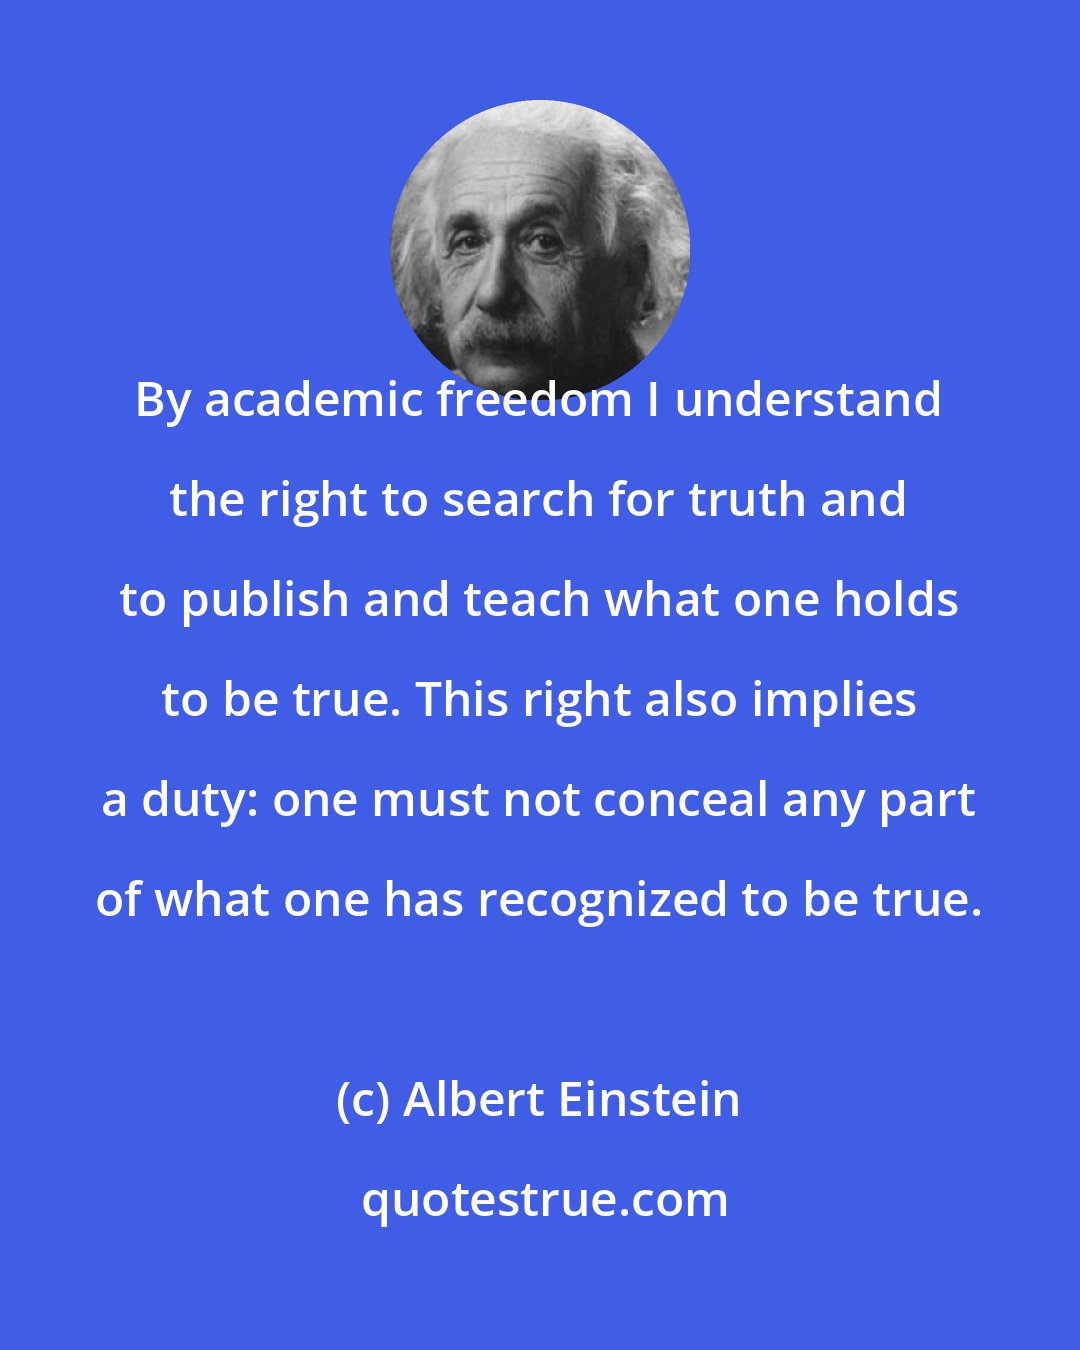 Albert Einstein: By academic freedom I understand the right to search for truth and to publish and teach what one holds to be true. This right also implies a duty: one must not conceal any part of what one has recognized to be true.